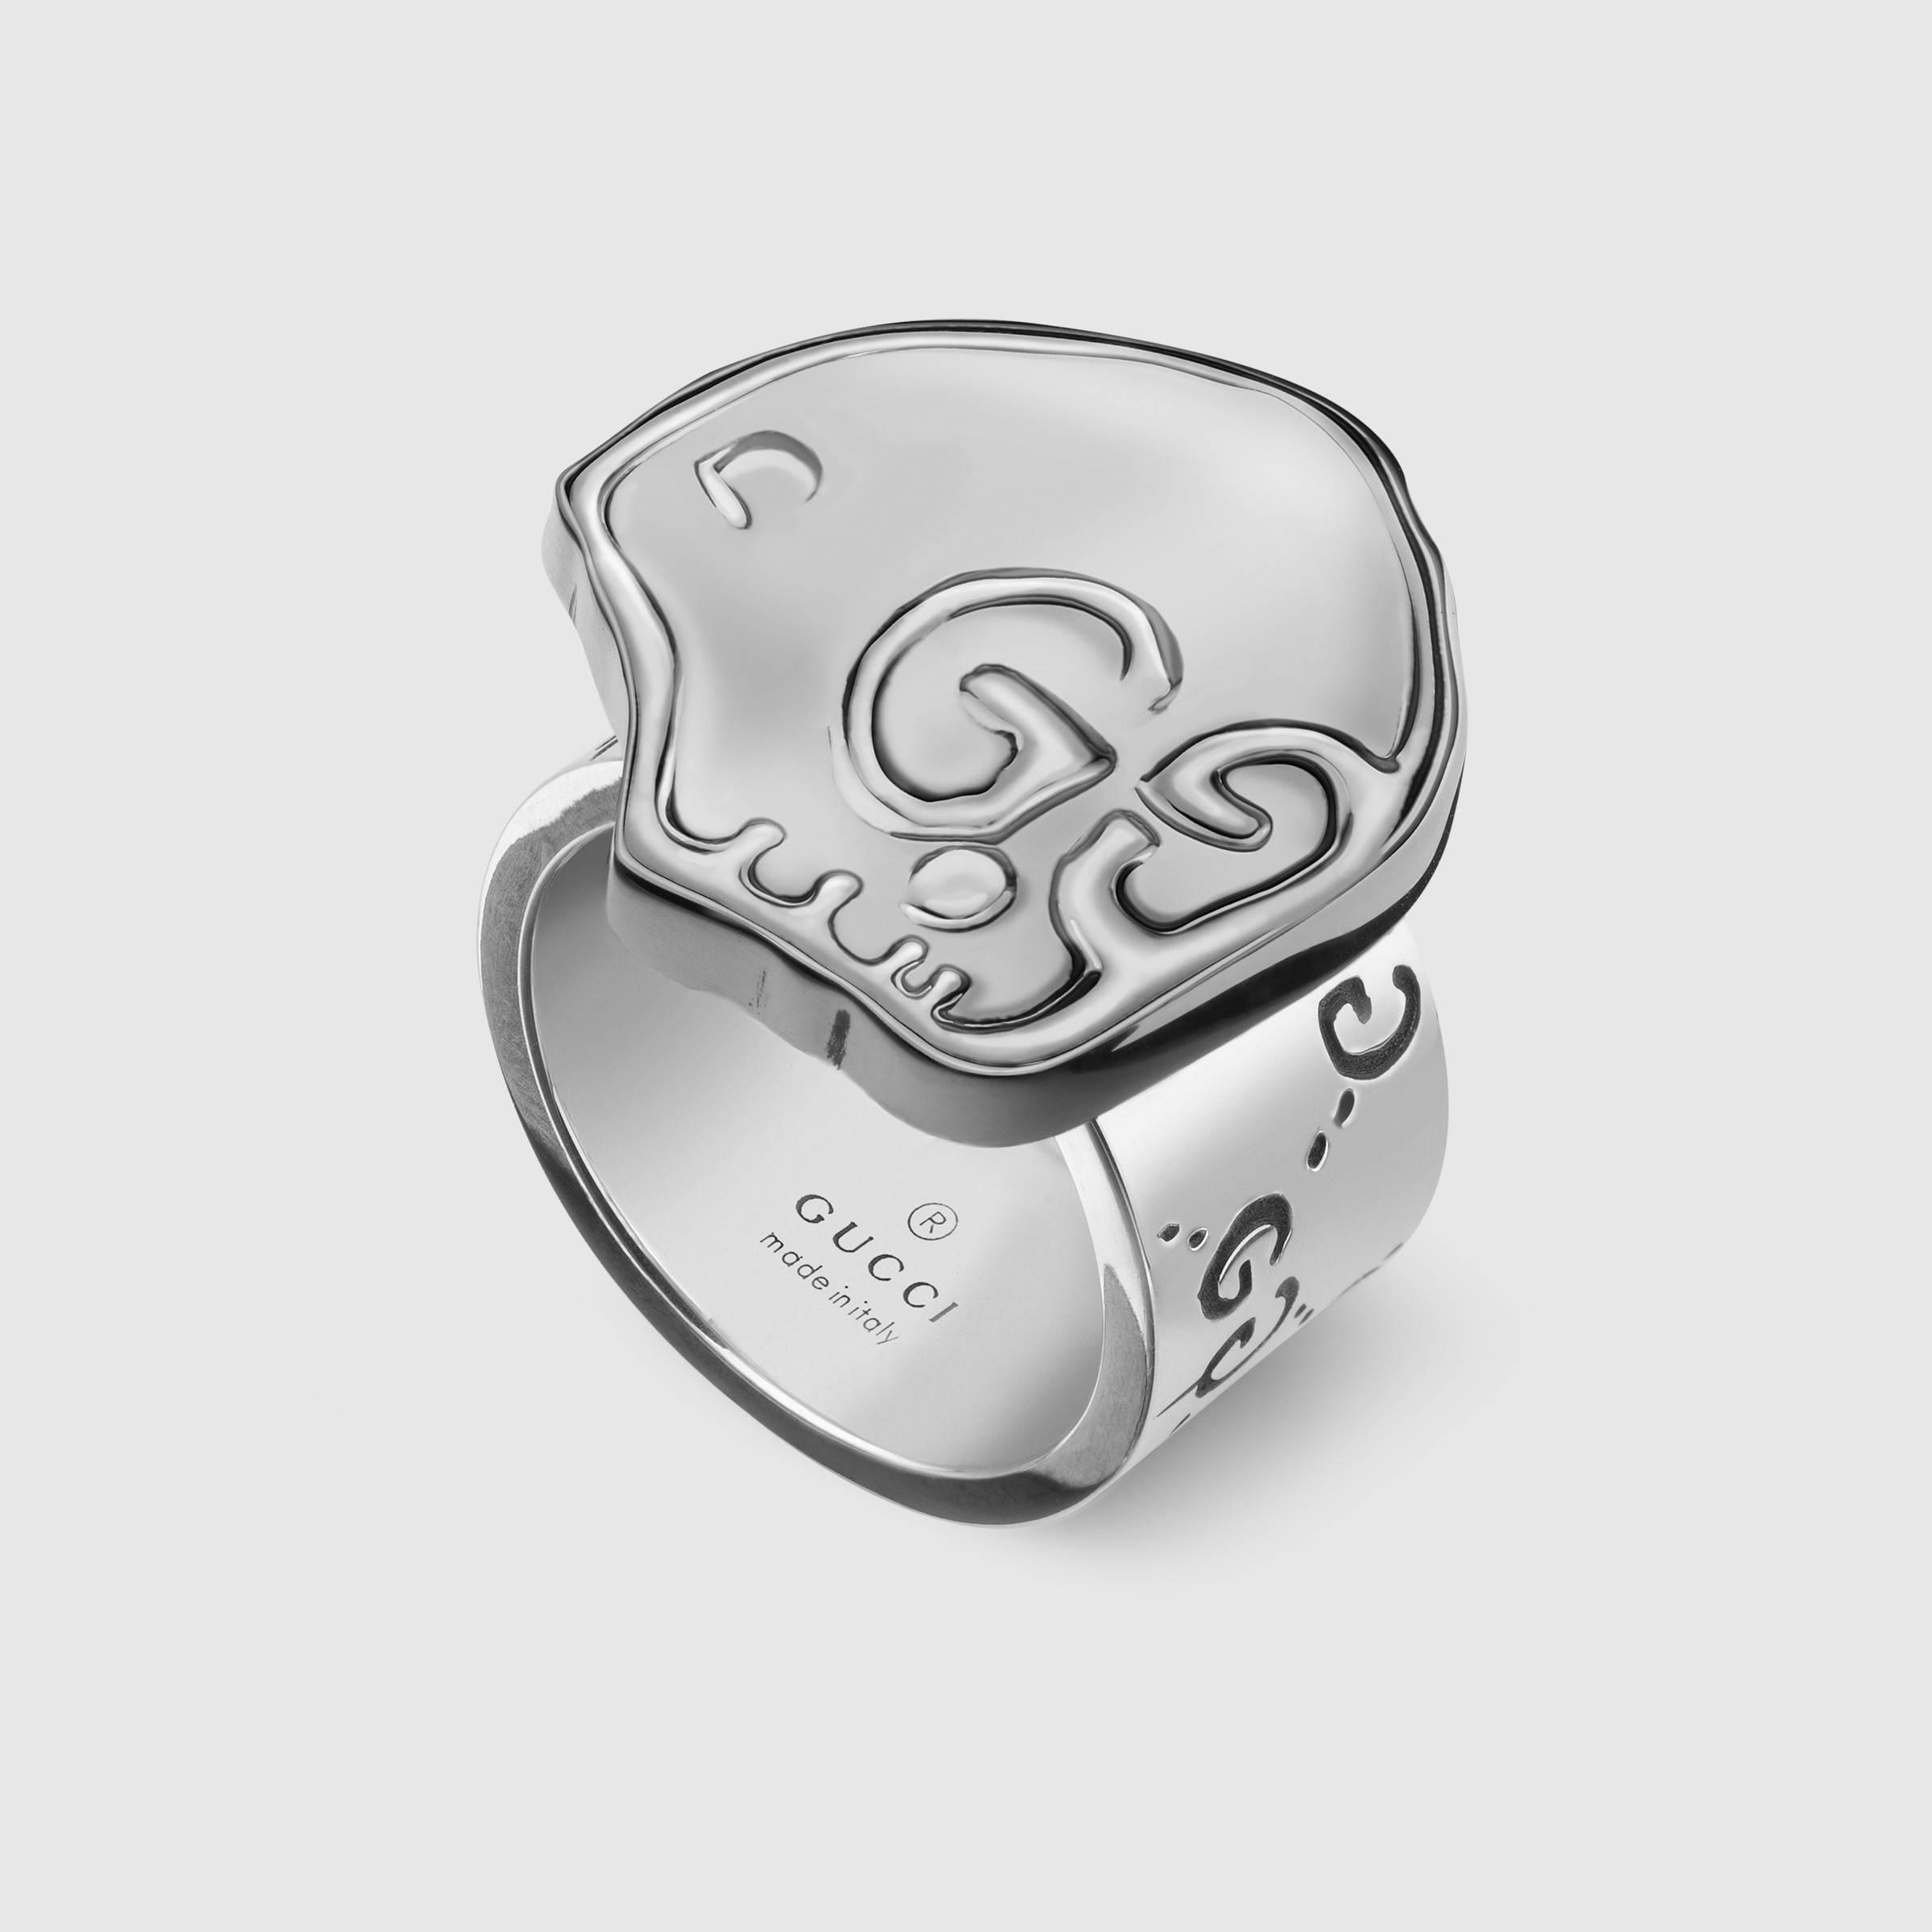 Lyst - Gucci Ghost Ring In Silver in Metallic